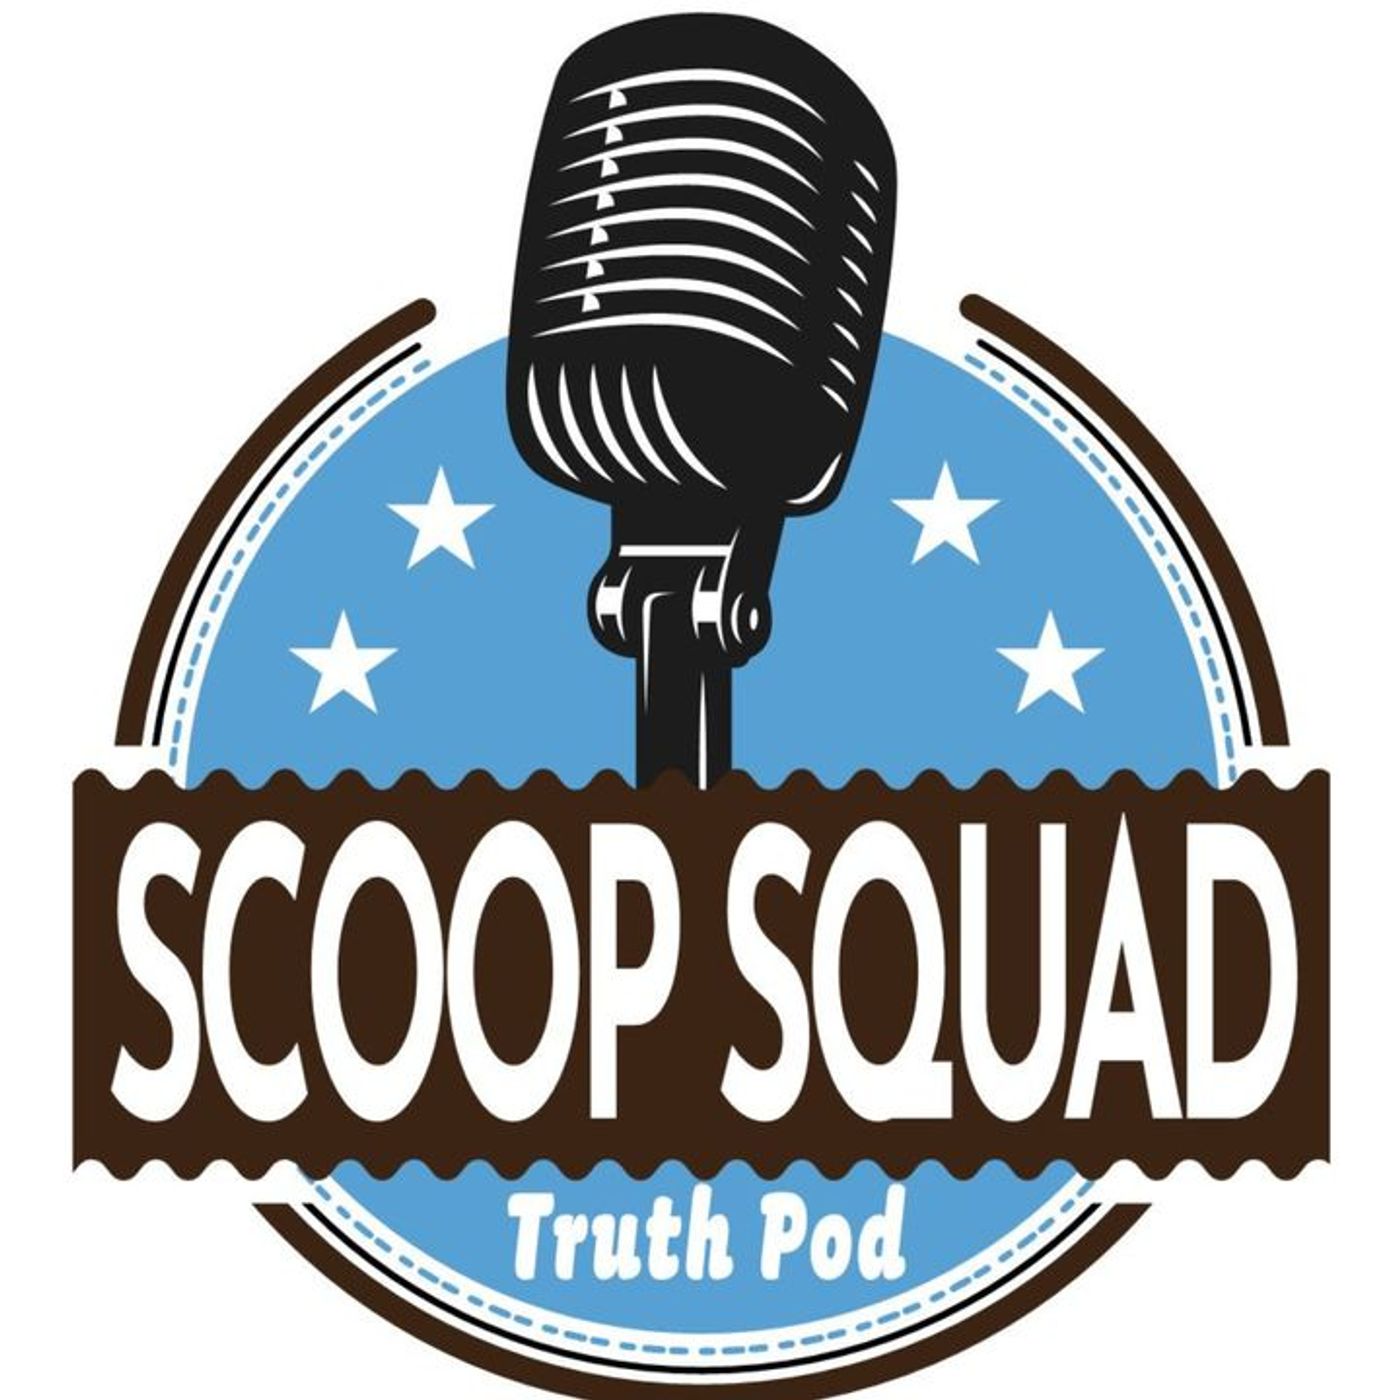 02/08/24 The Scoop Squad Truth Pod: A Deep Dive into CPS - Protection or Peril?